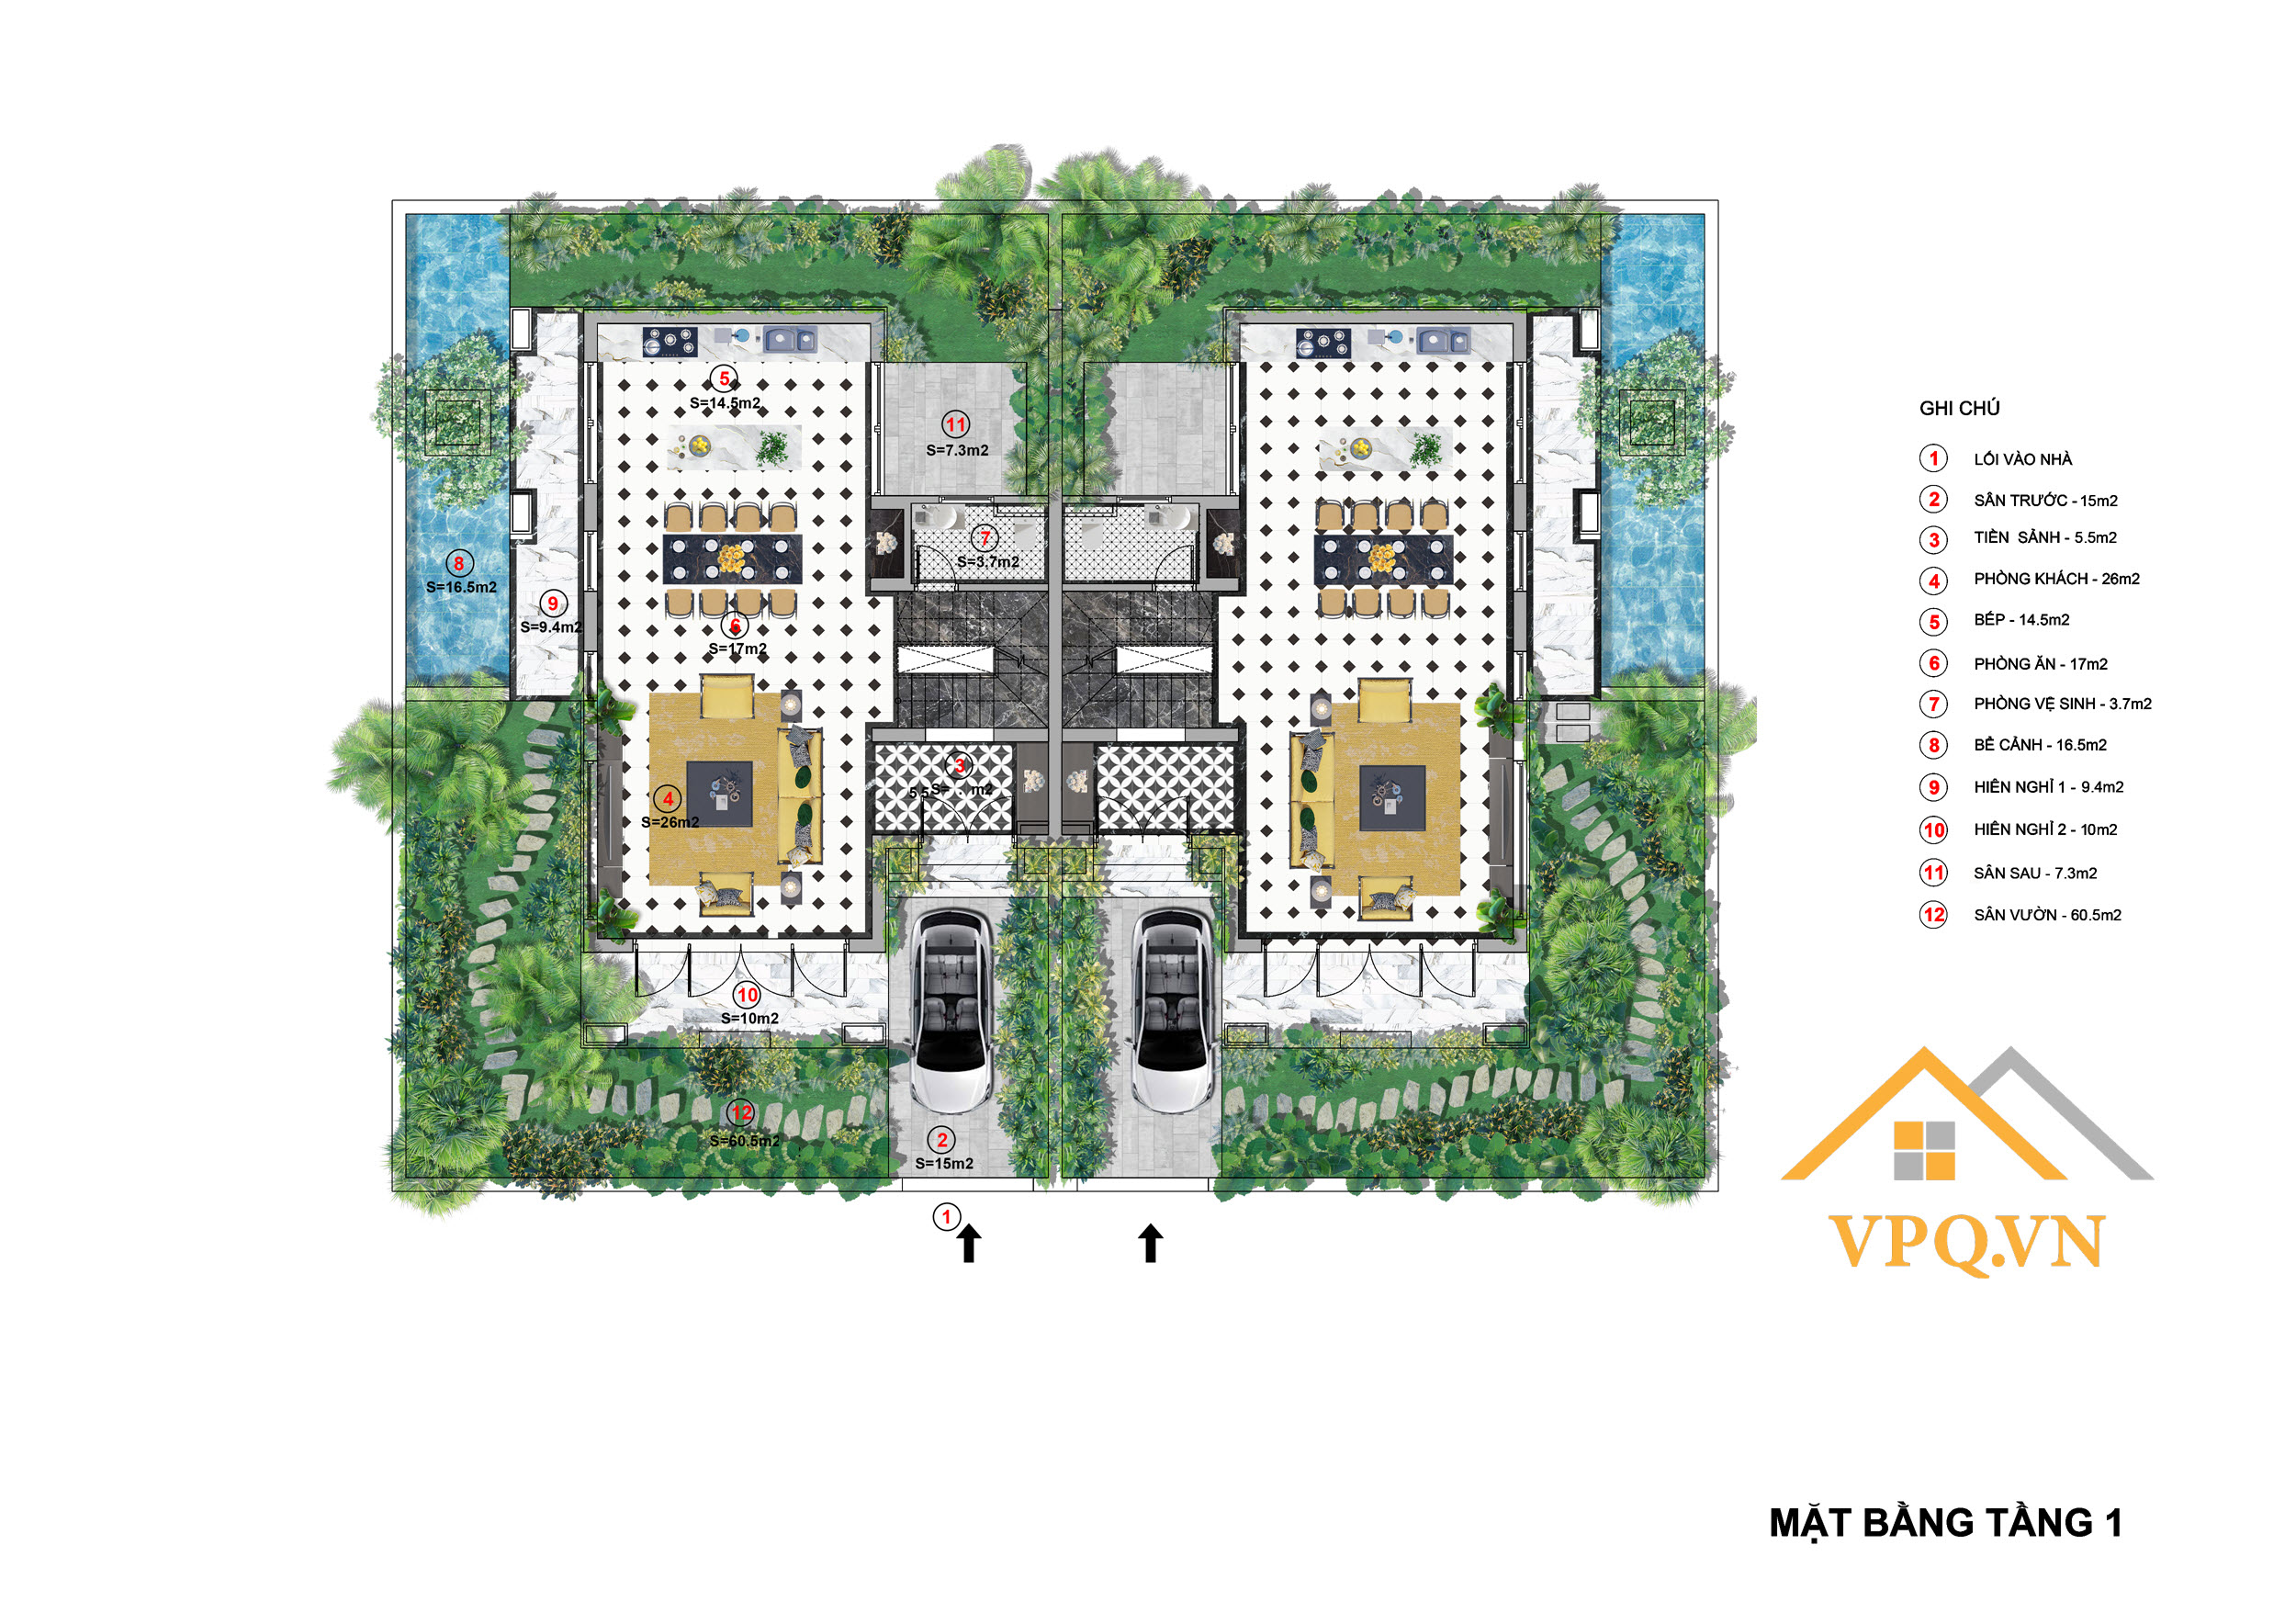 Layout tầng 1 biệt thự song lập A - Sun Tropical Village